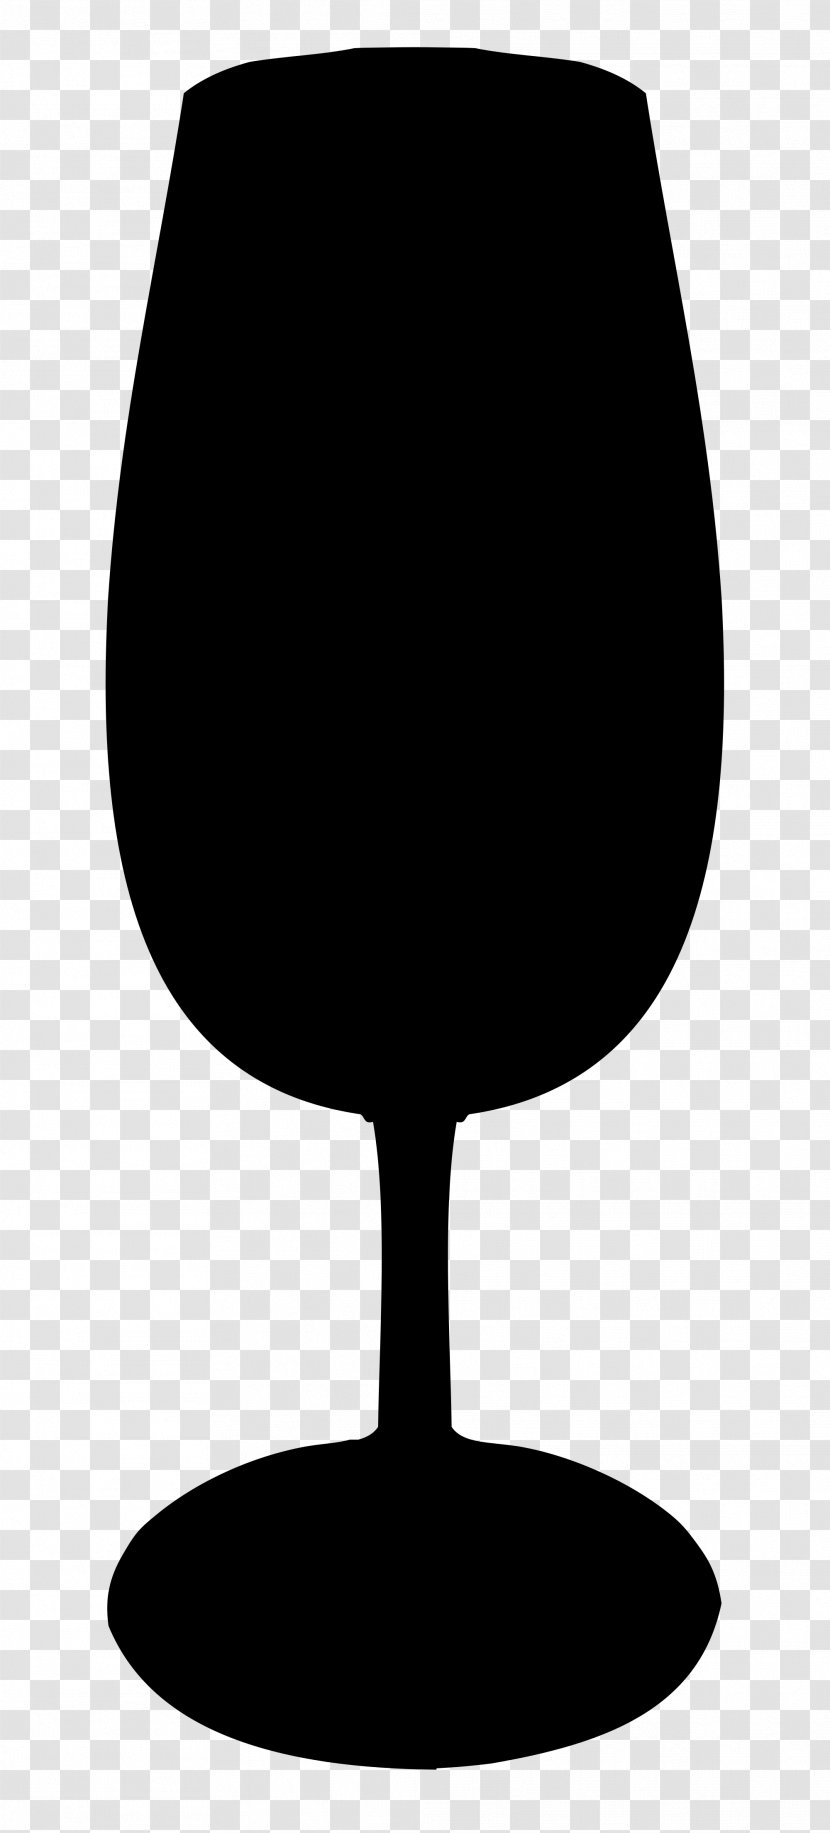 Wine Glass Champagne Black - Silhouette Transparent PNG